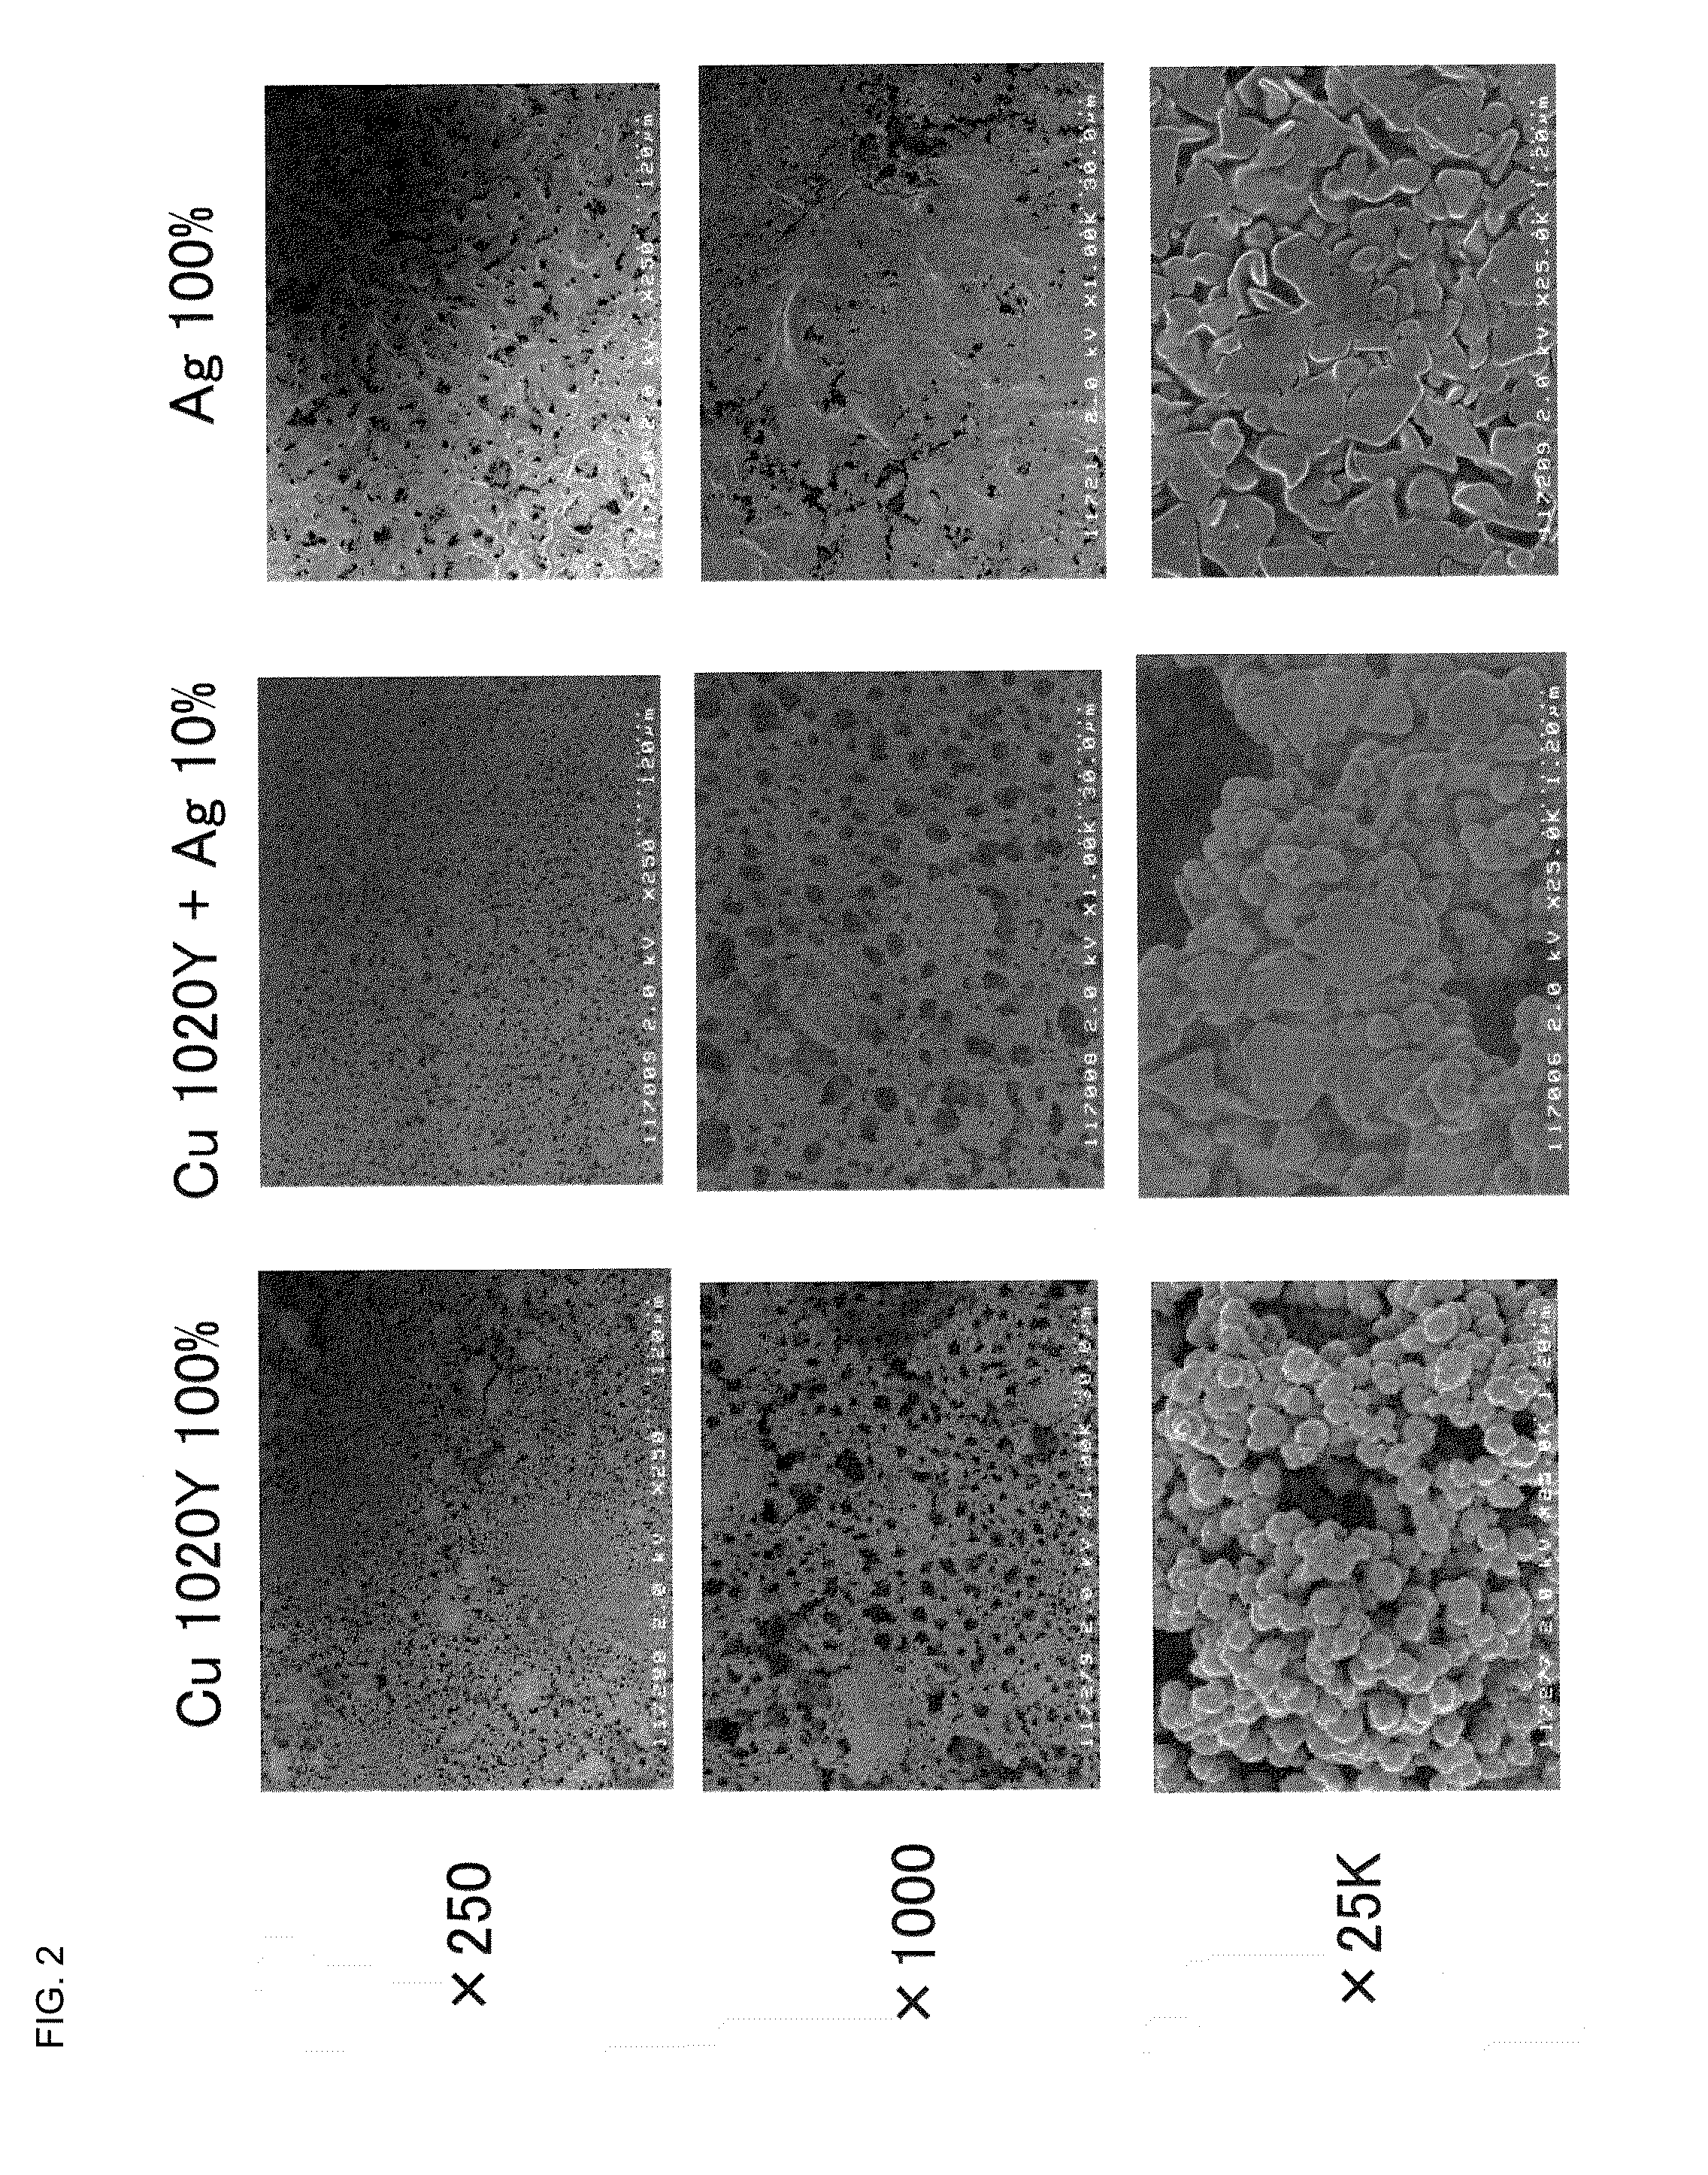 Conductive pattern formation method and composition for forming conductive pattern via photo irradiation or microwave heating